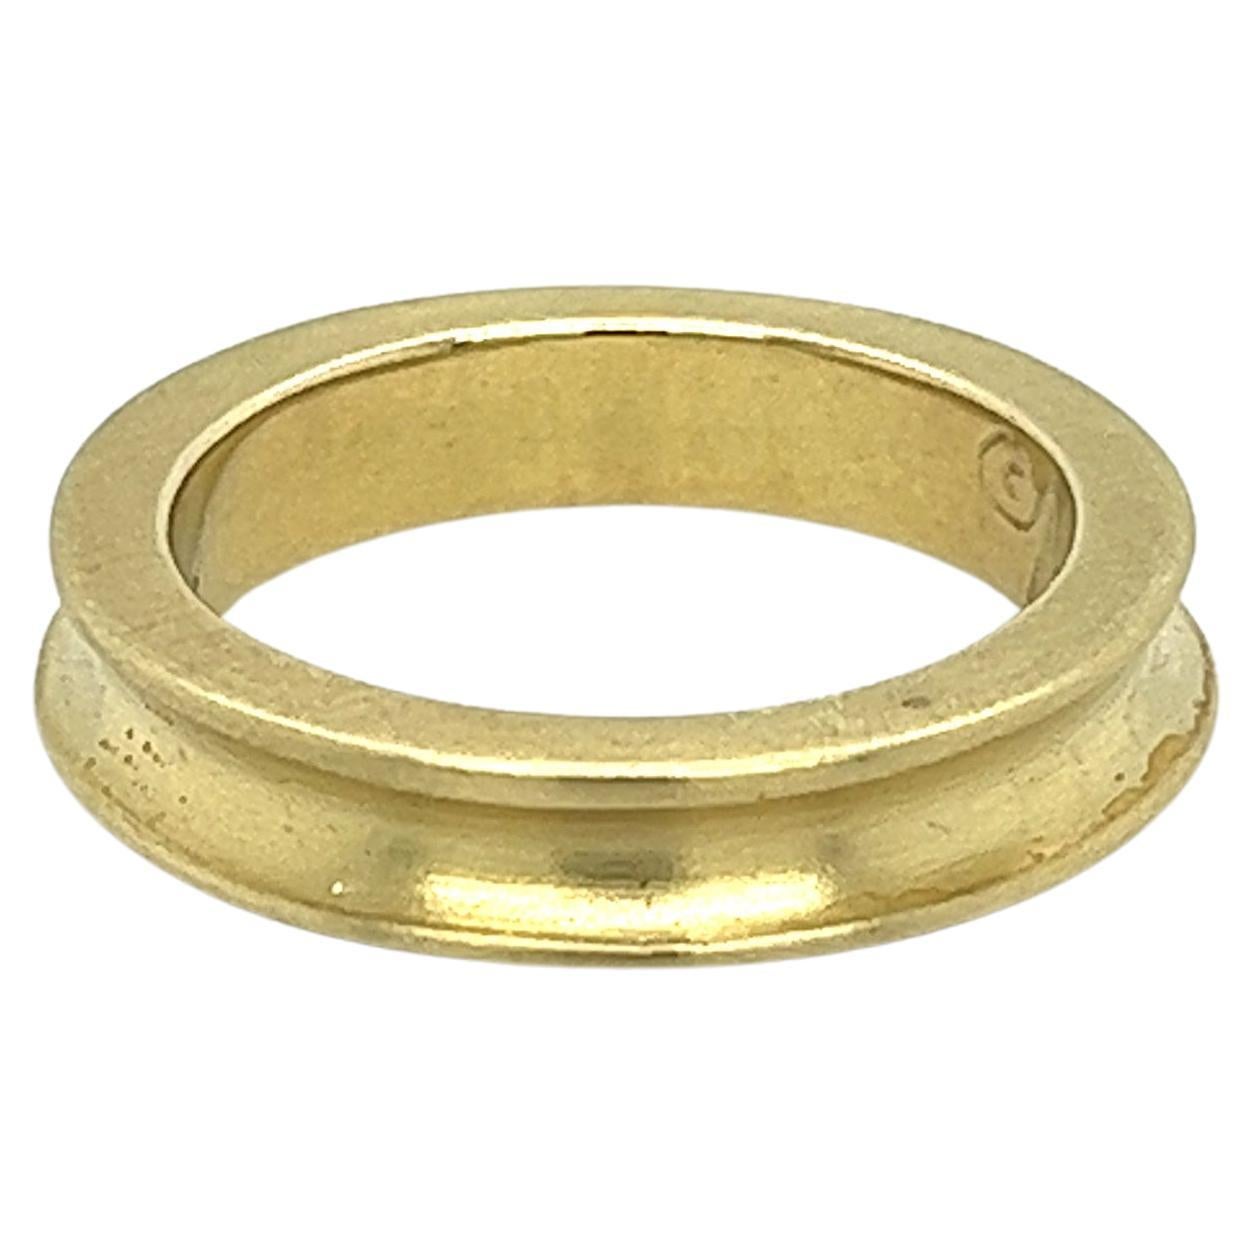 14k solid gold ring by Mignon Faget. This ring features an uneven, curved design that sets it apart from traditional pieces and creates a unique, eye-catching look. The soft brushed gold finish gives the ring a warm, natural feel, making it a